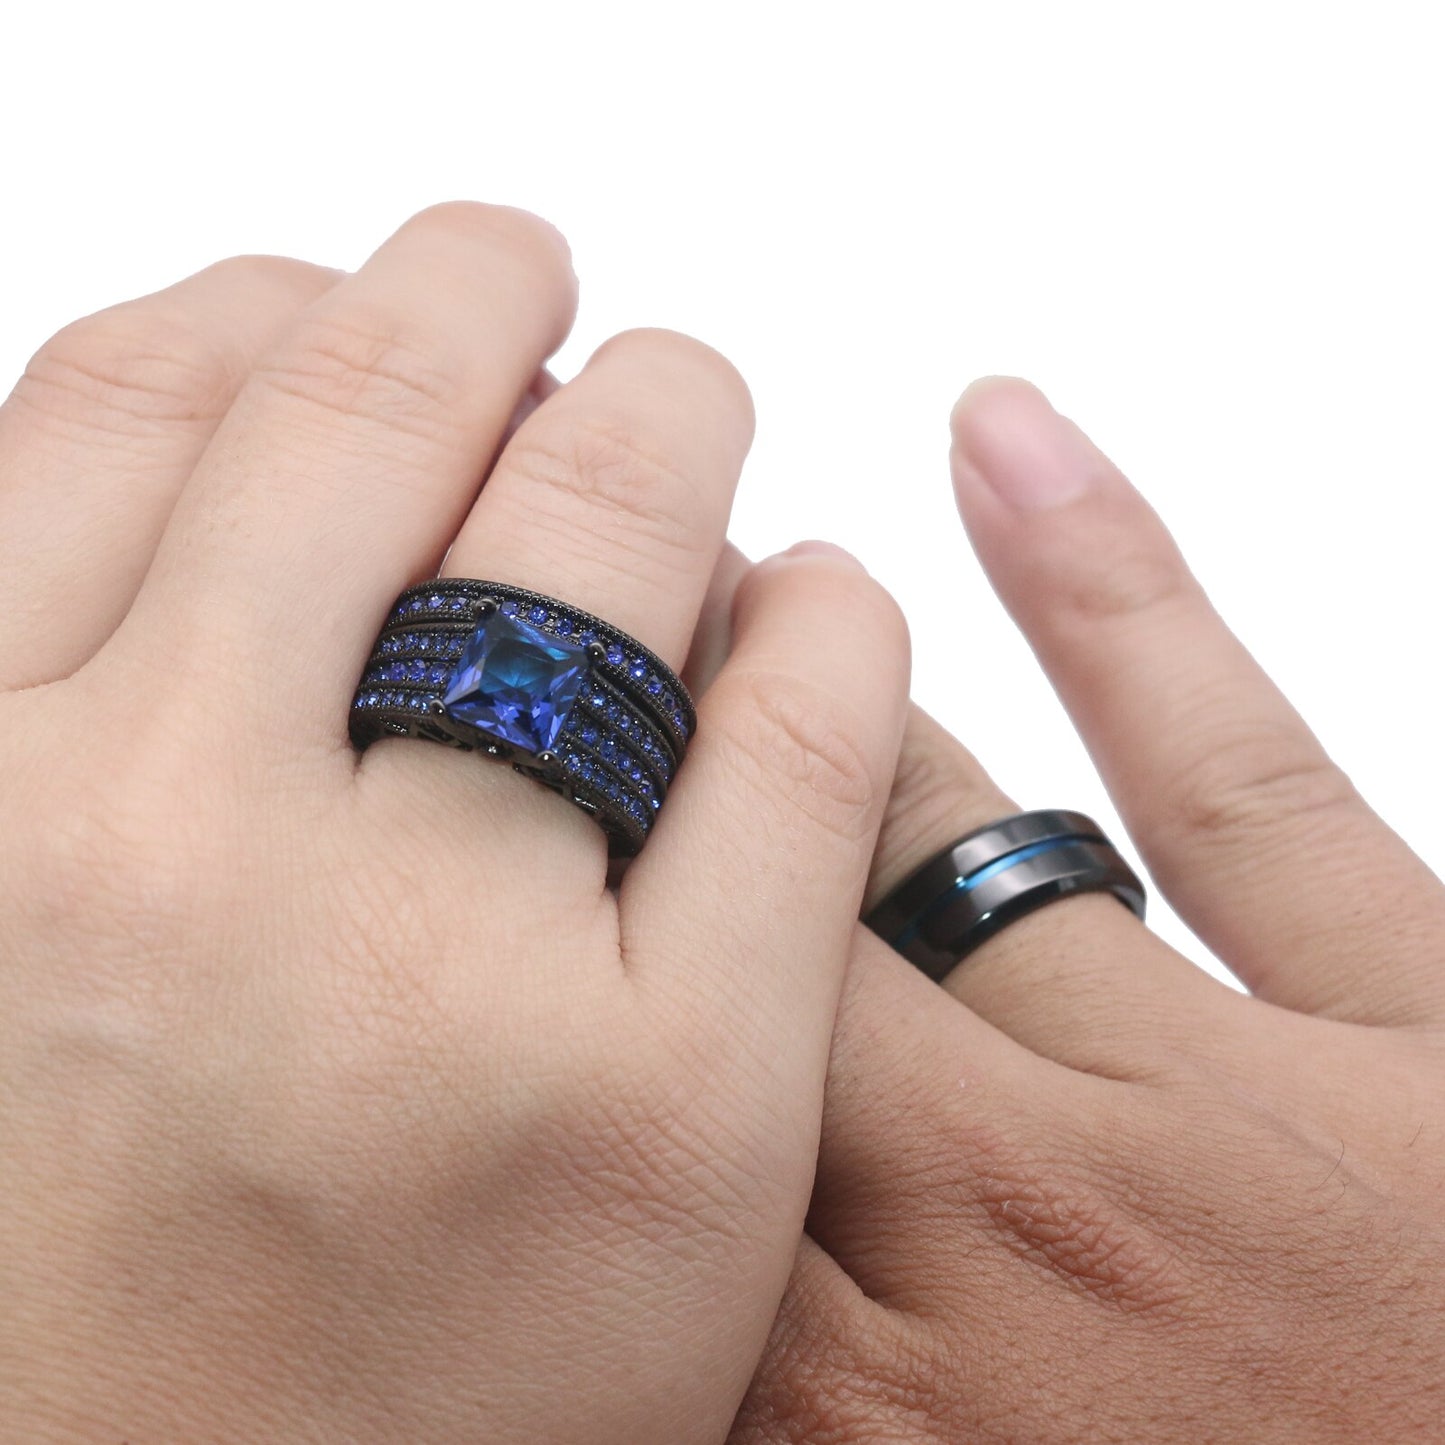 Romantic Blue Rhinestone Couples Ring Set for Women and Men - Trendy Stainless Steel Fashion Jewelry for Lover Gifts